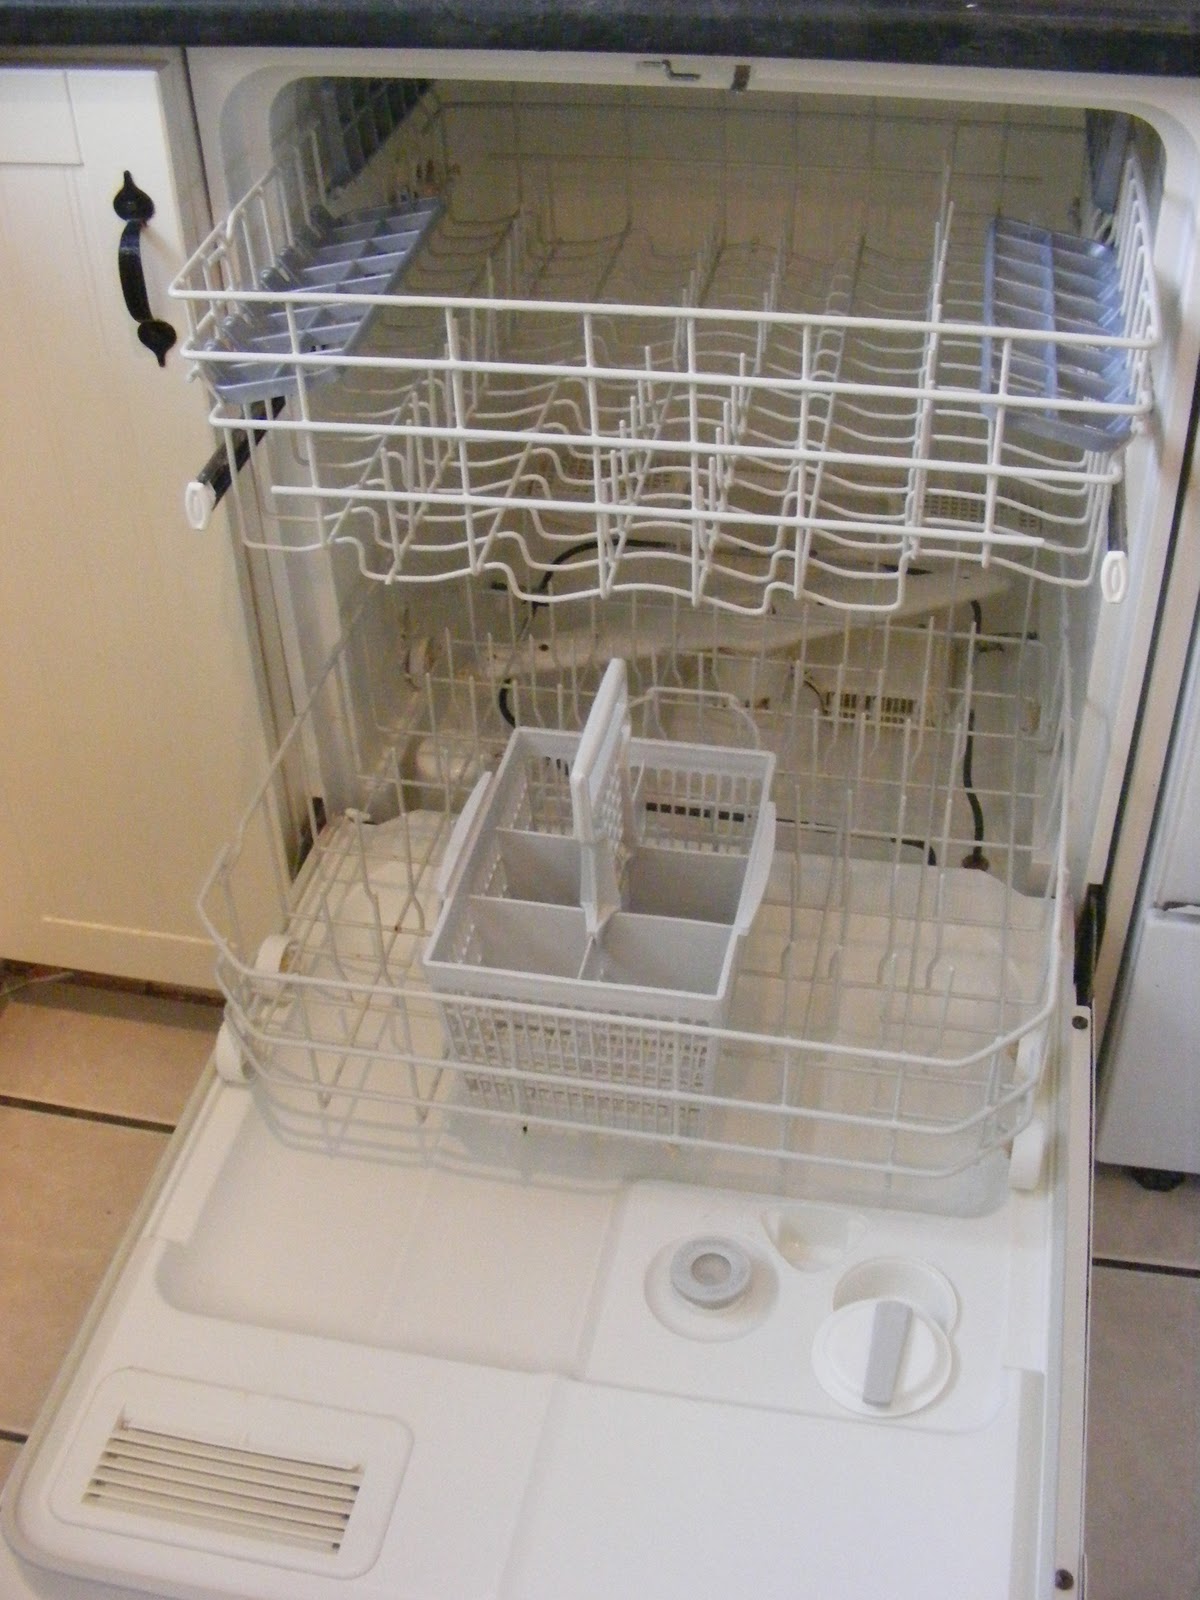 Dishwasher Cleaning With Vinegar And Baking Soda